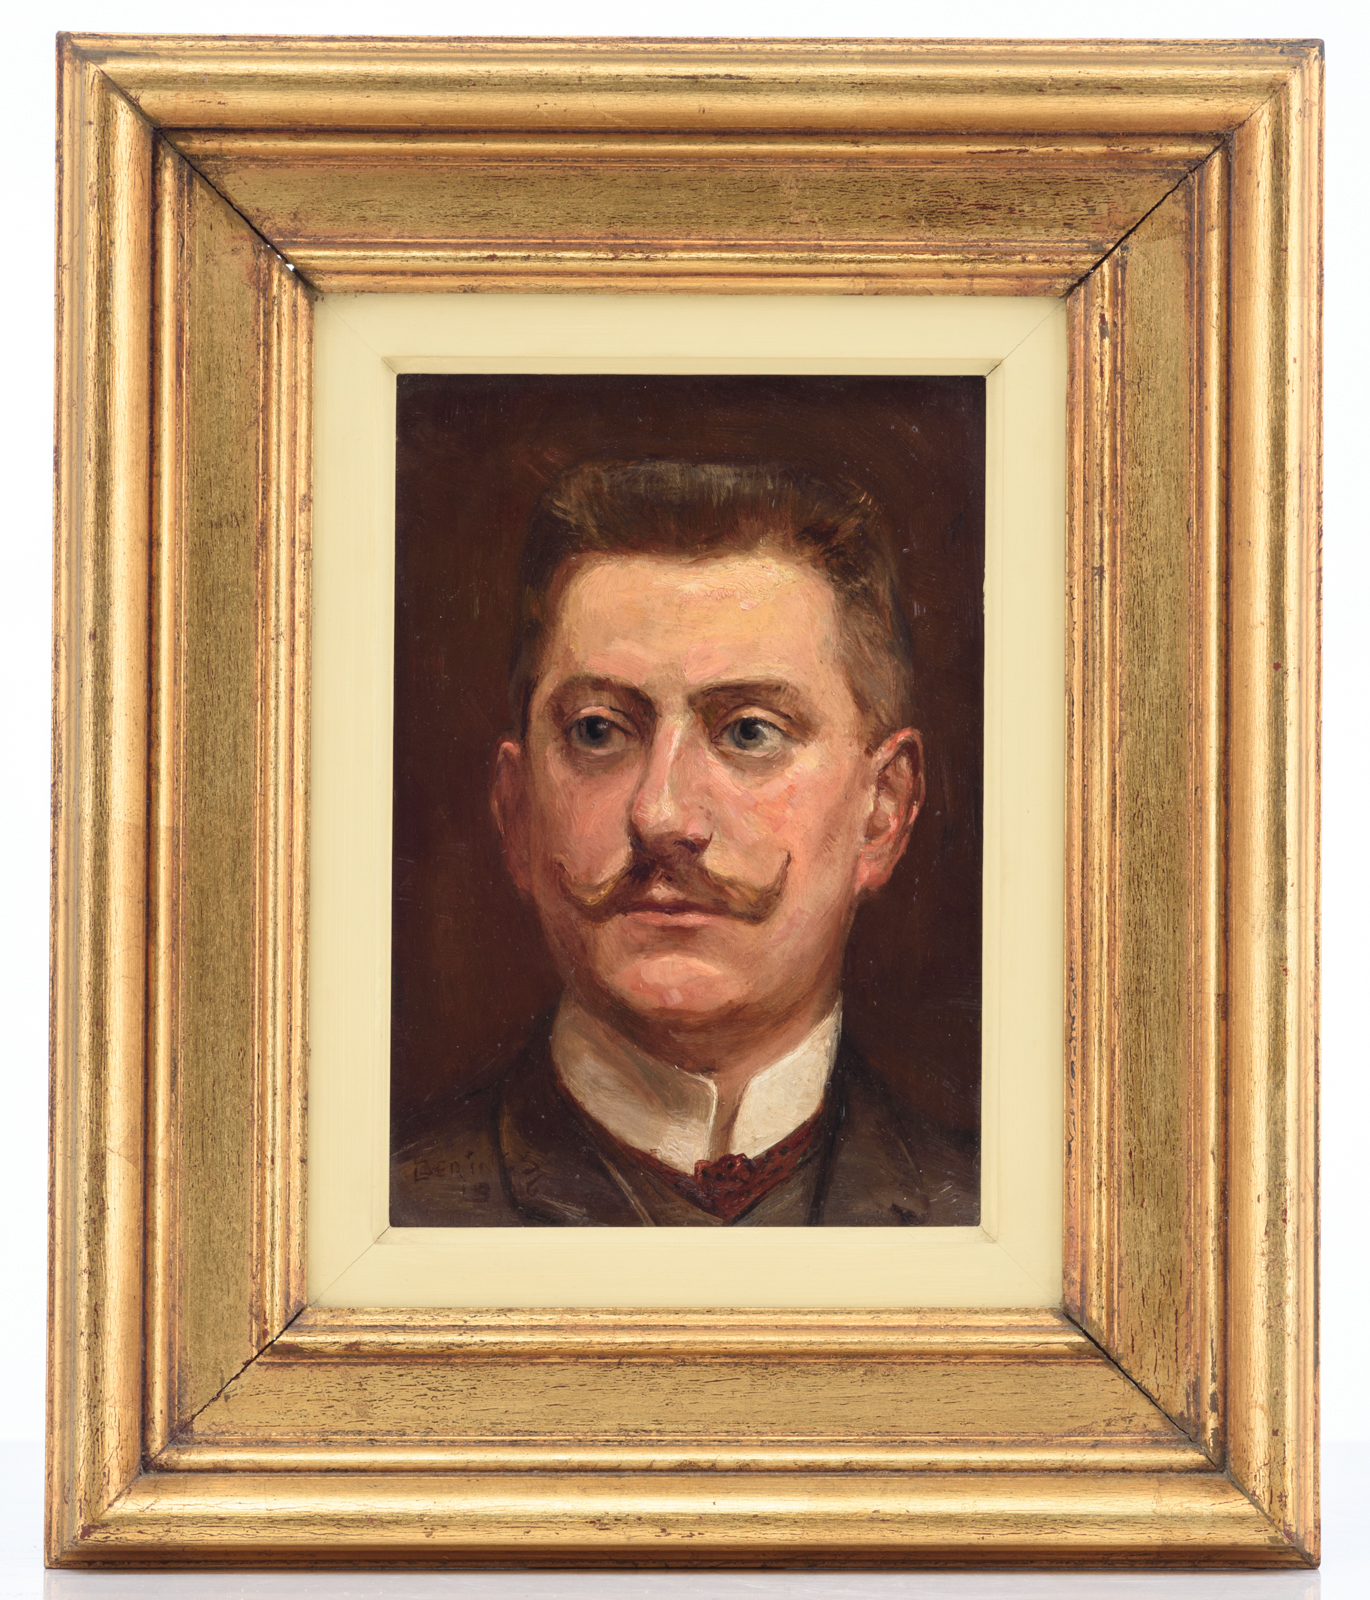 Berings L., the portrait of a man, dated 1916, oil on panel, 15 x 20,5 cm - Image 2 of 4